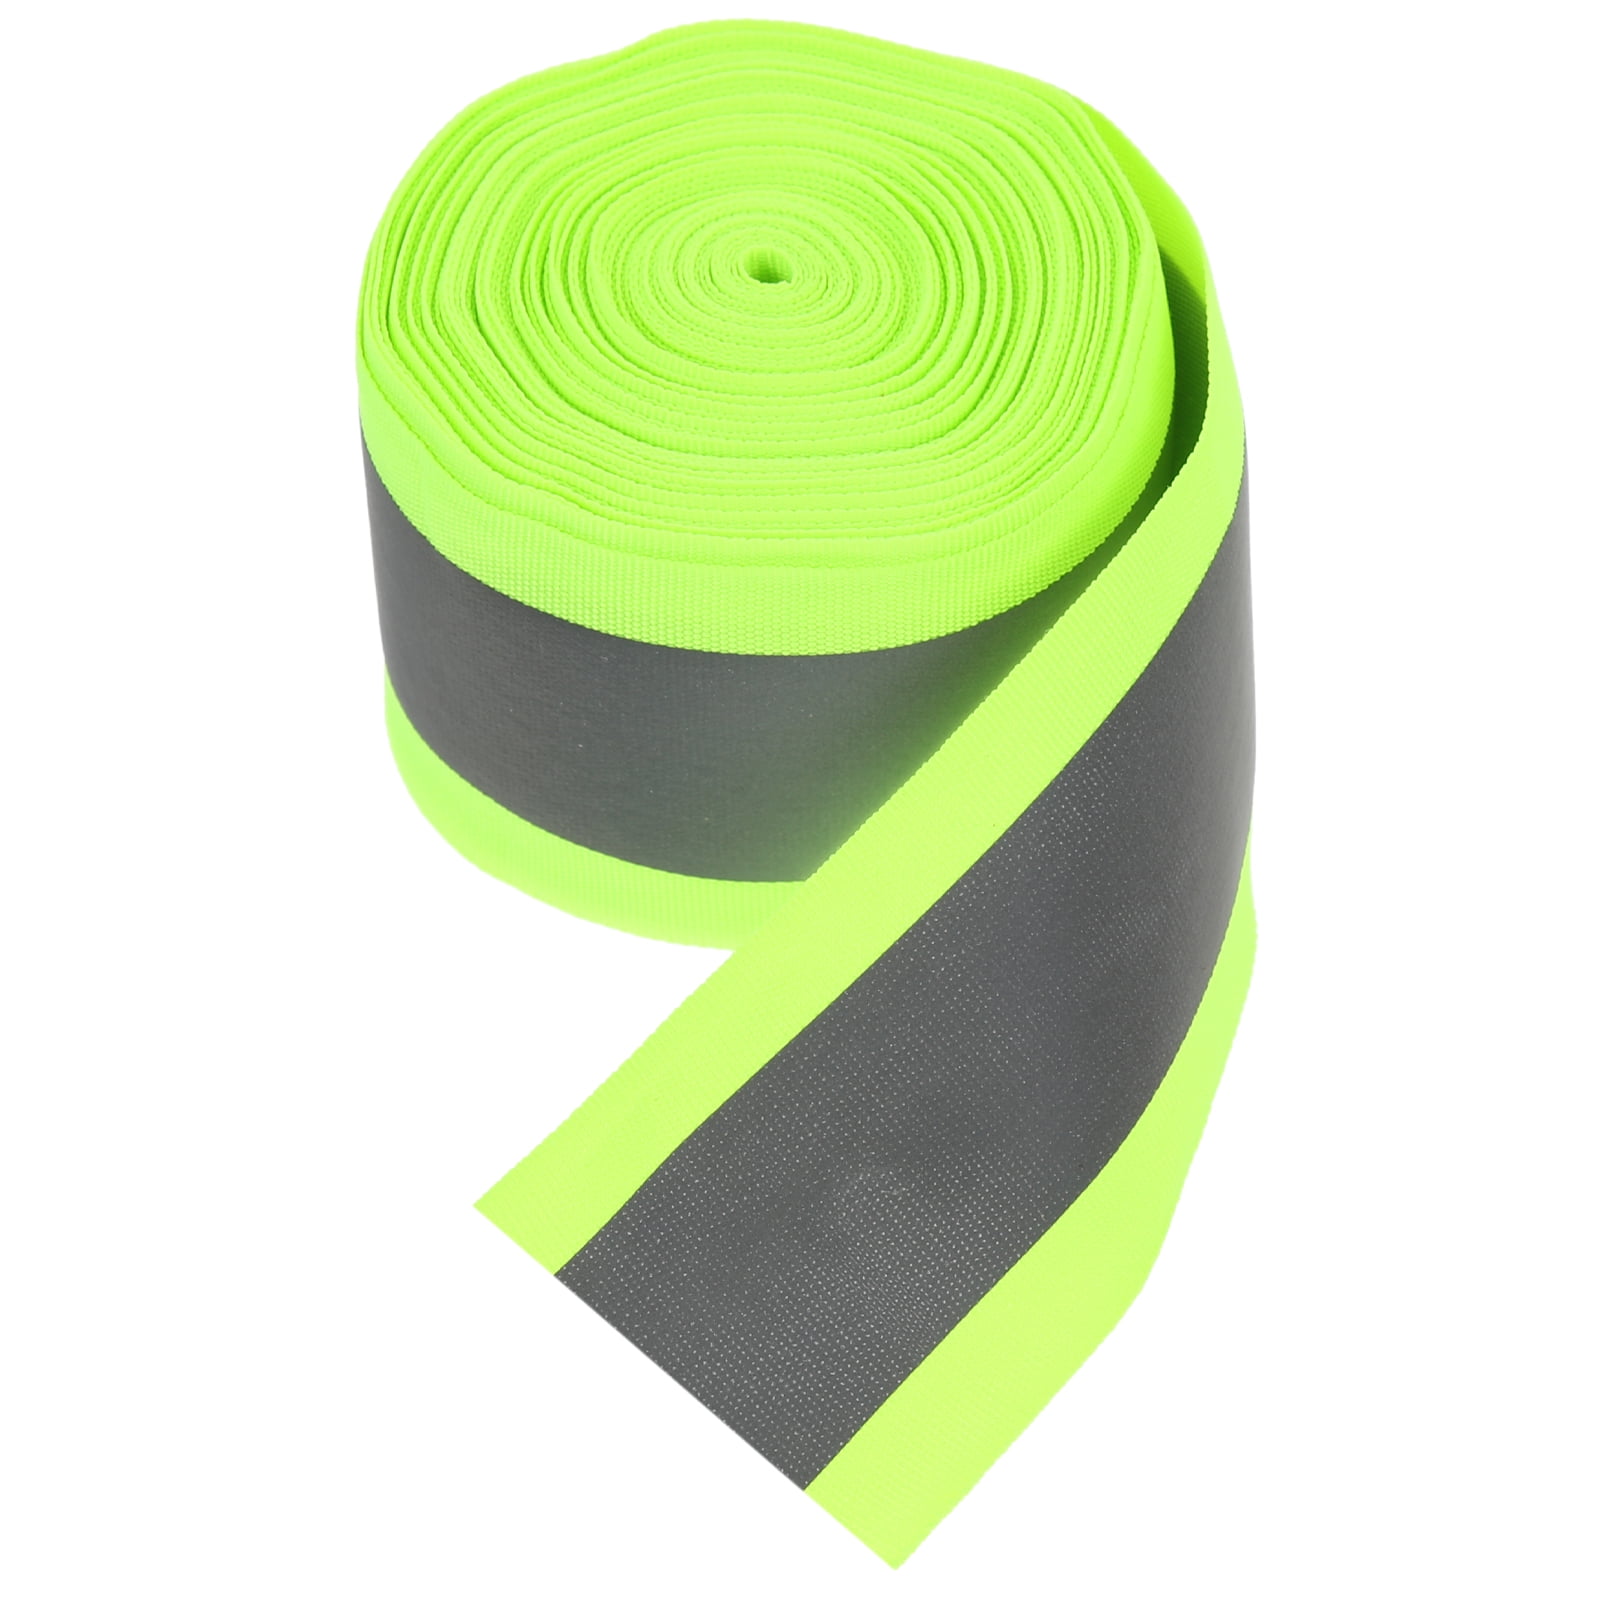 1 Roll of Sew On Reflective Fabric Strip Reflective Webbing High ...